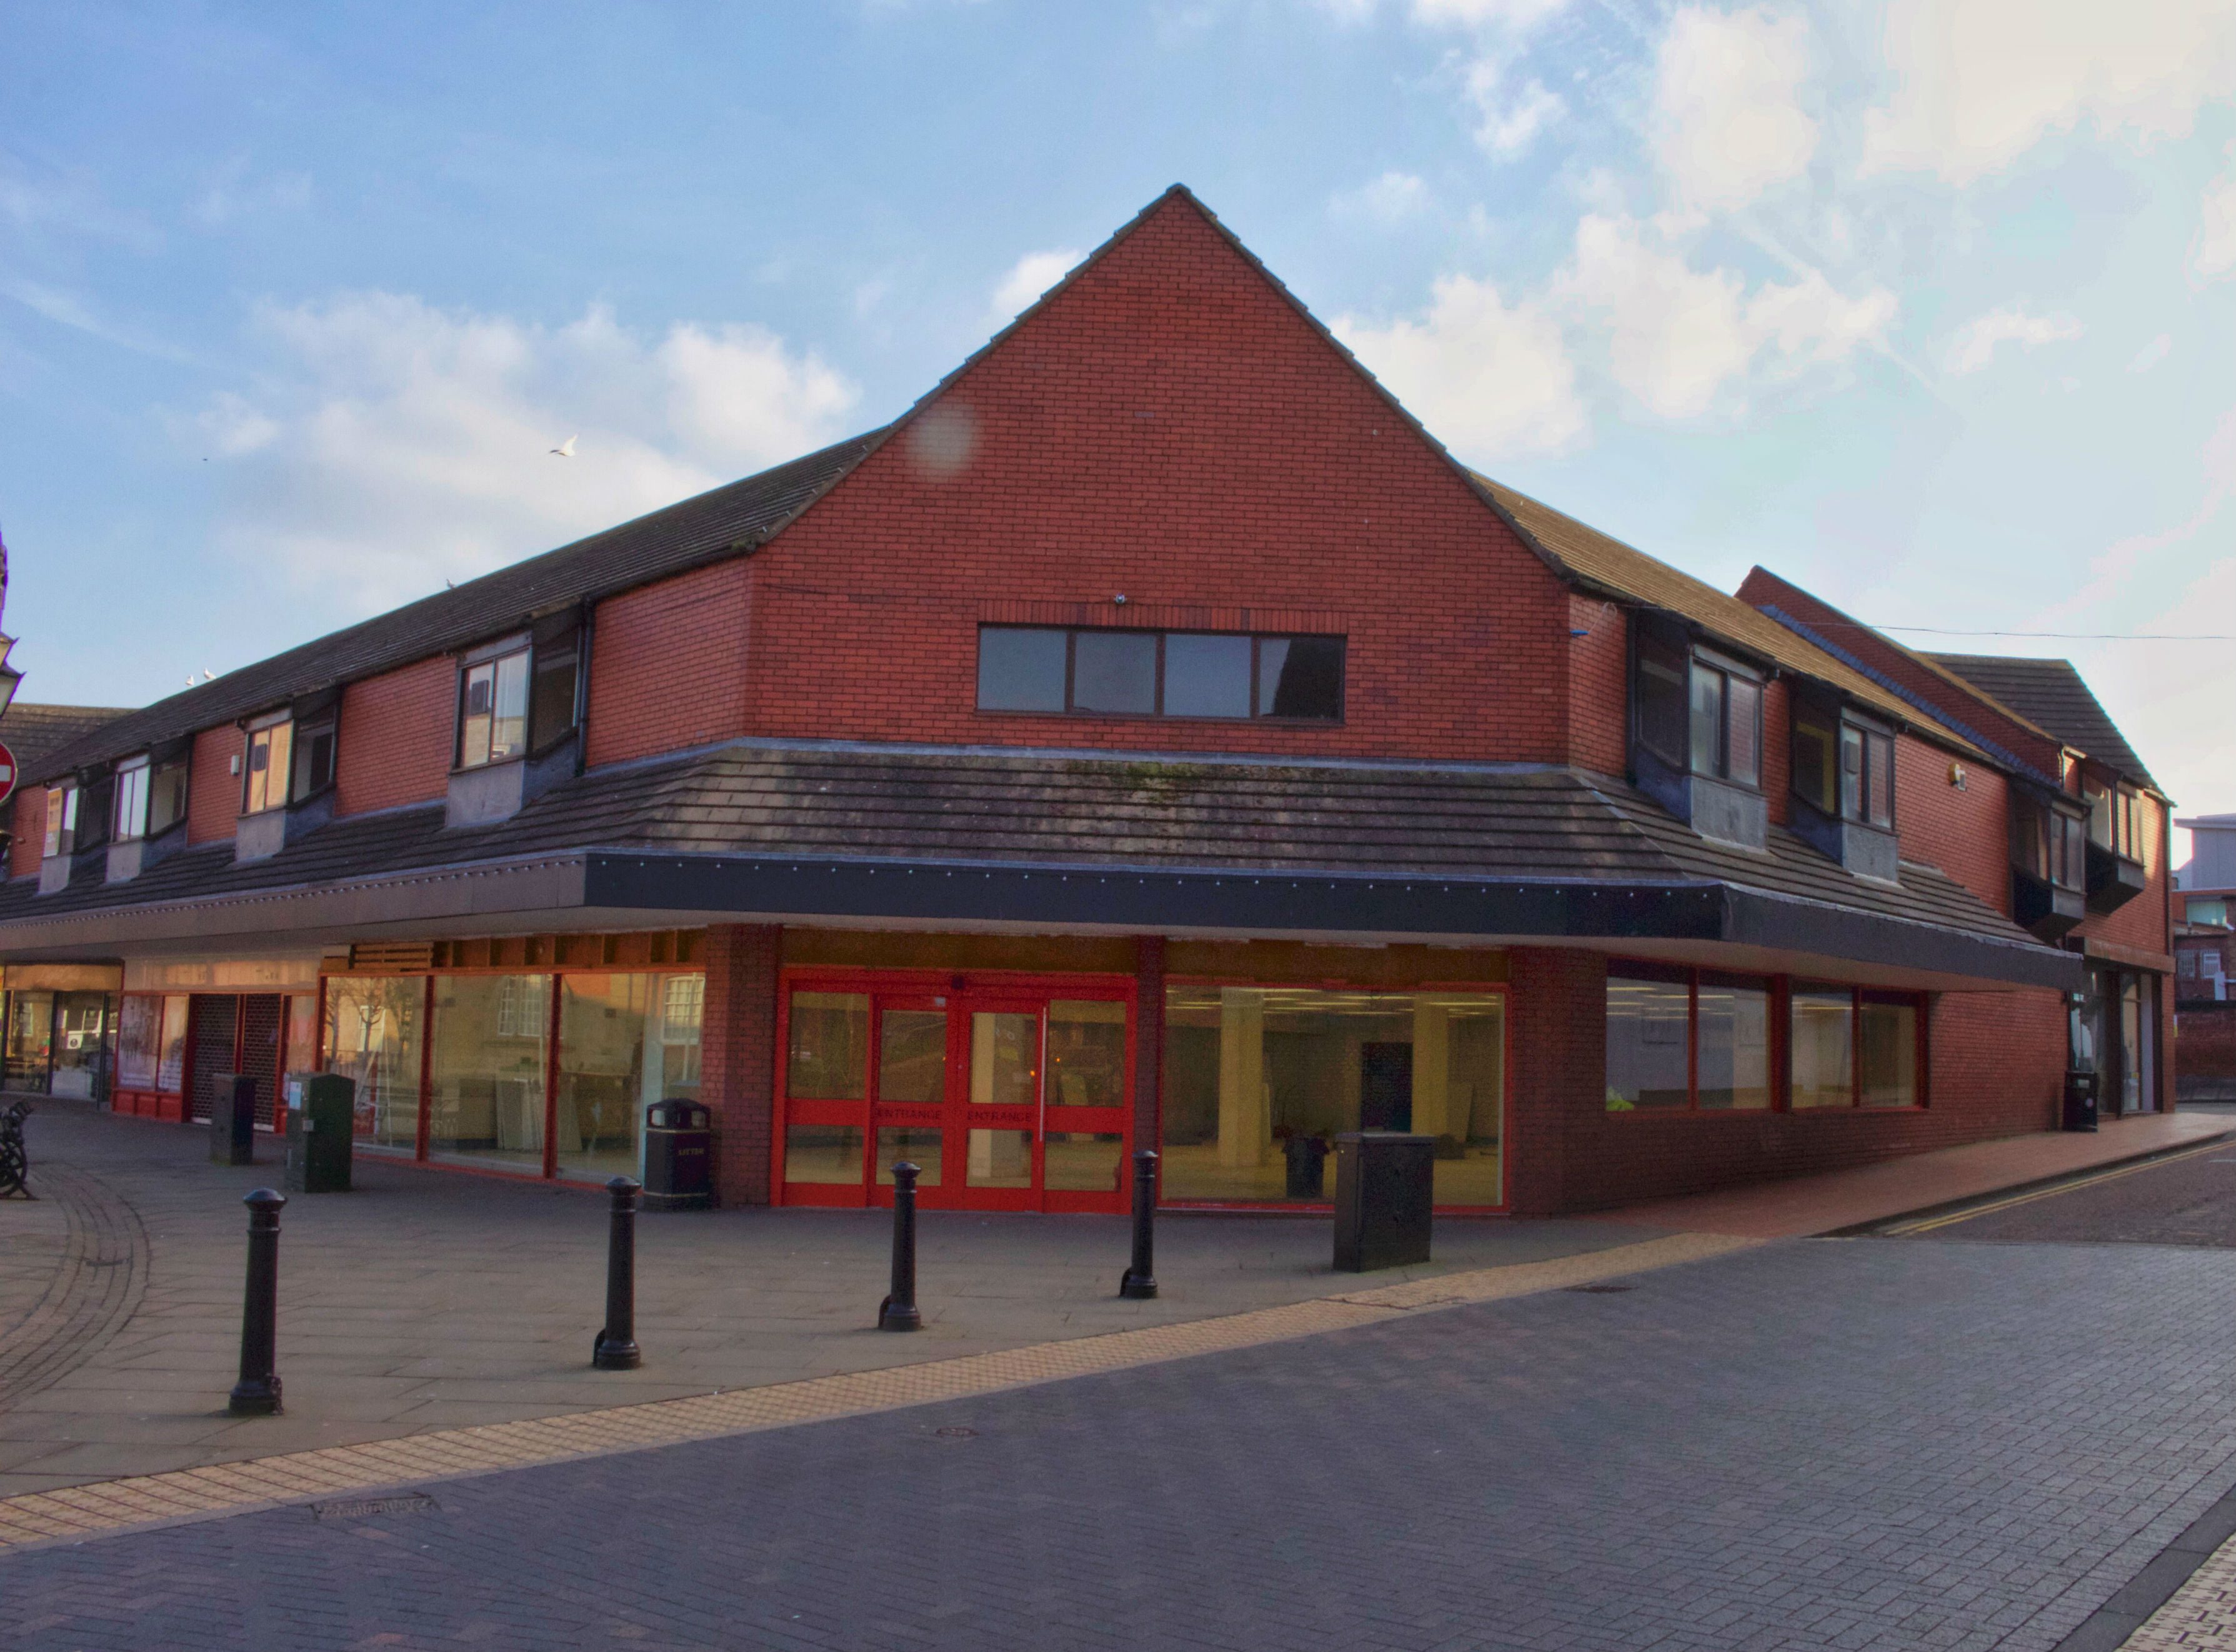 Need help for your business? Check out Wrexham's new Enterprise Hub